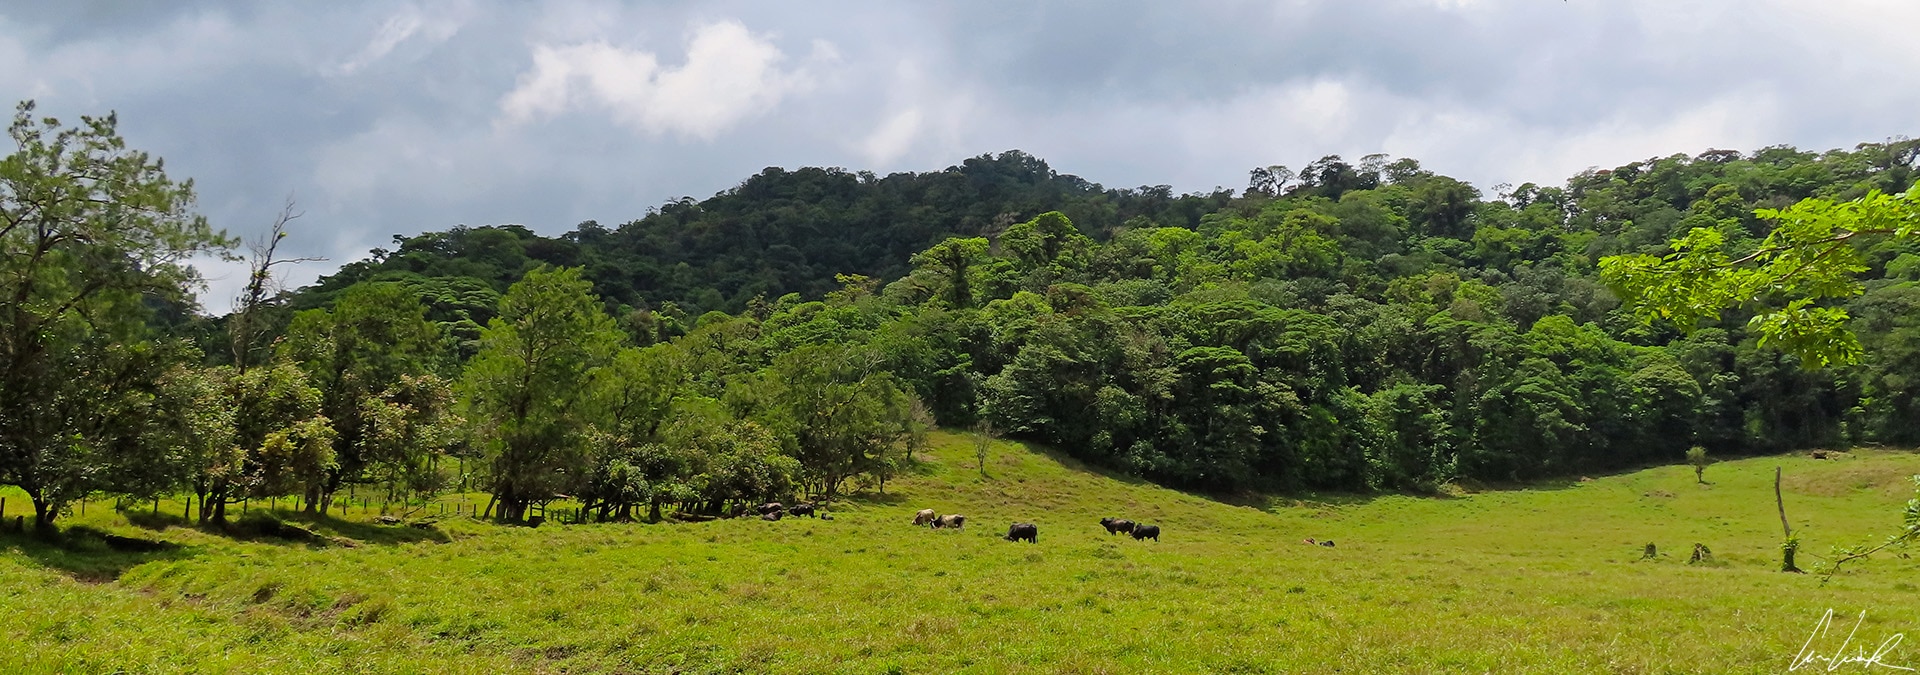 On the volcanic sides of the Arenal, the land is extremely fertile. The vegetation is lush and the cattle graze in the vast pastures under the supervision of sabaneros.